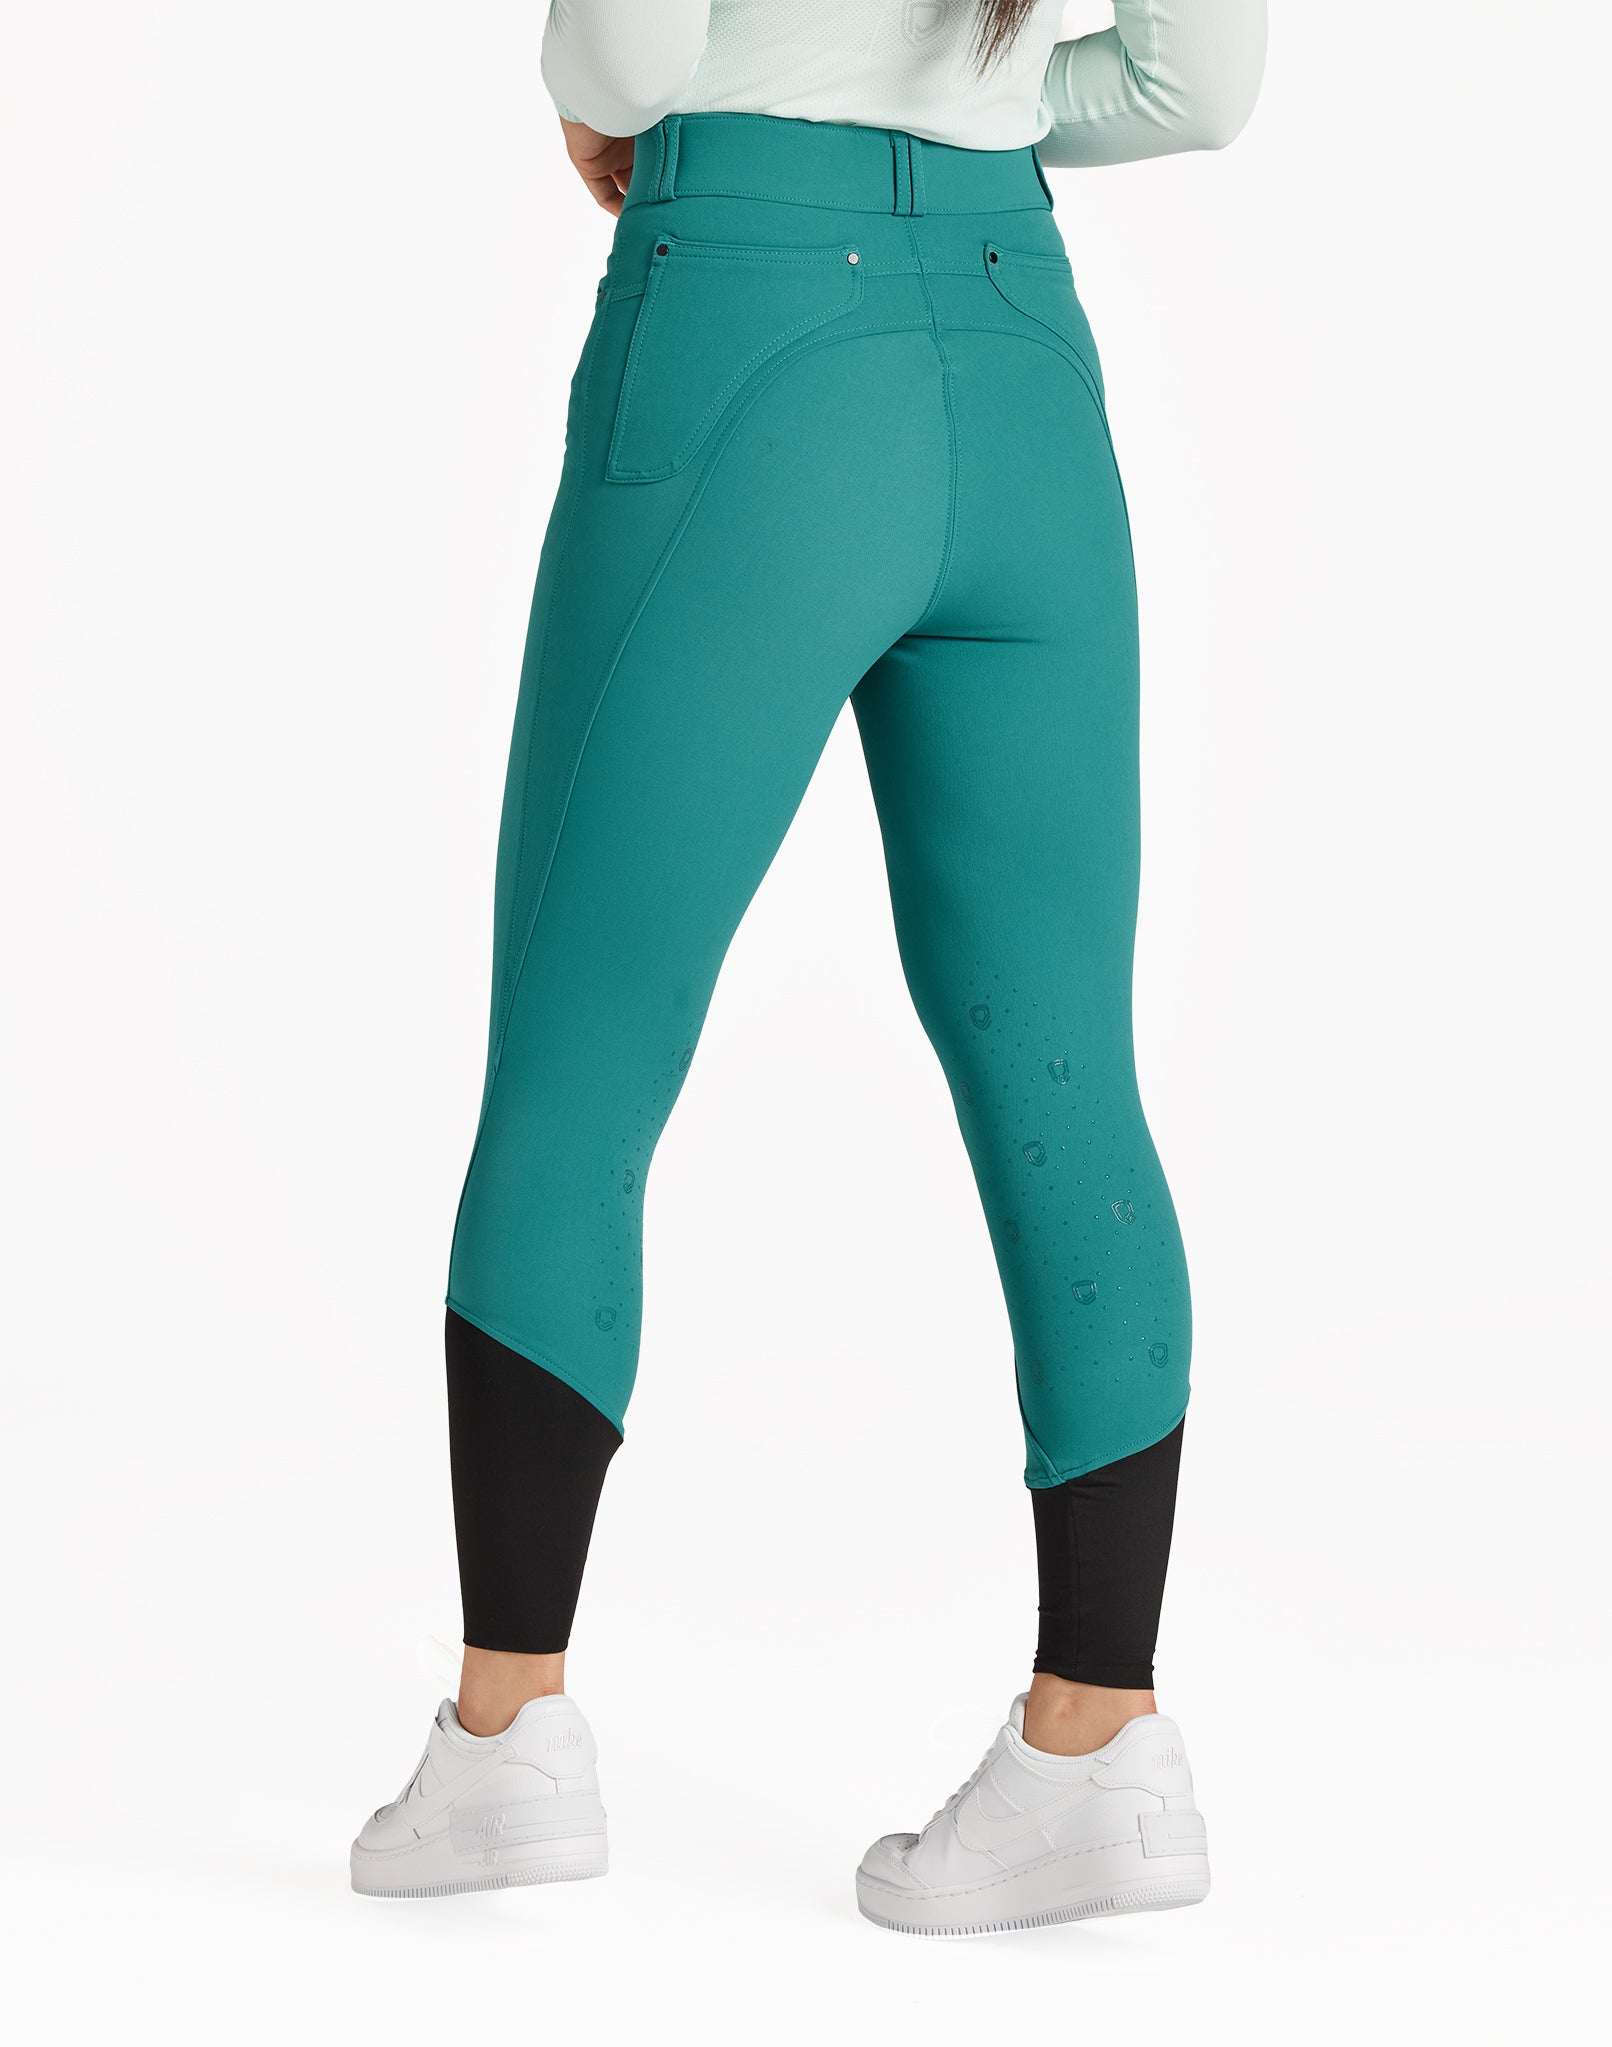 The Breeches - Teal